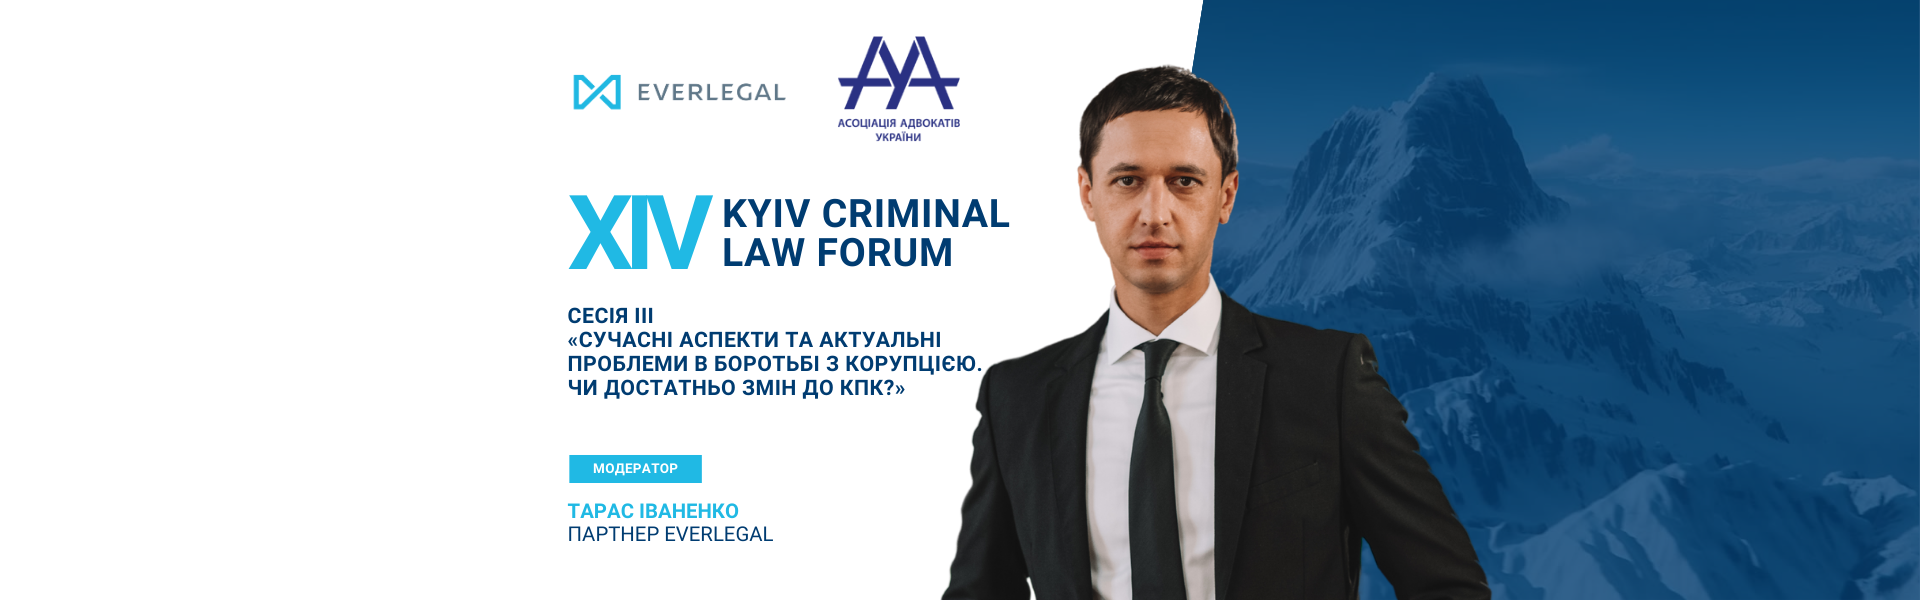 Welcome to the XIV Kyiv Criminal Law Forum